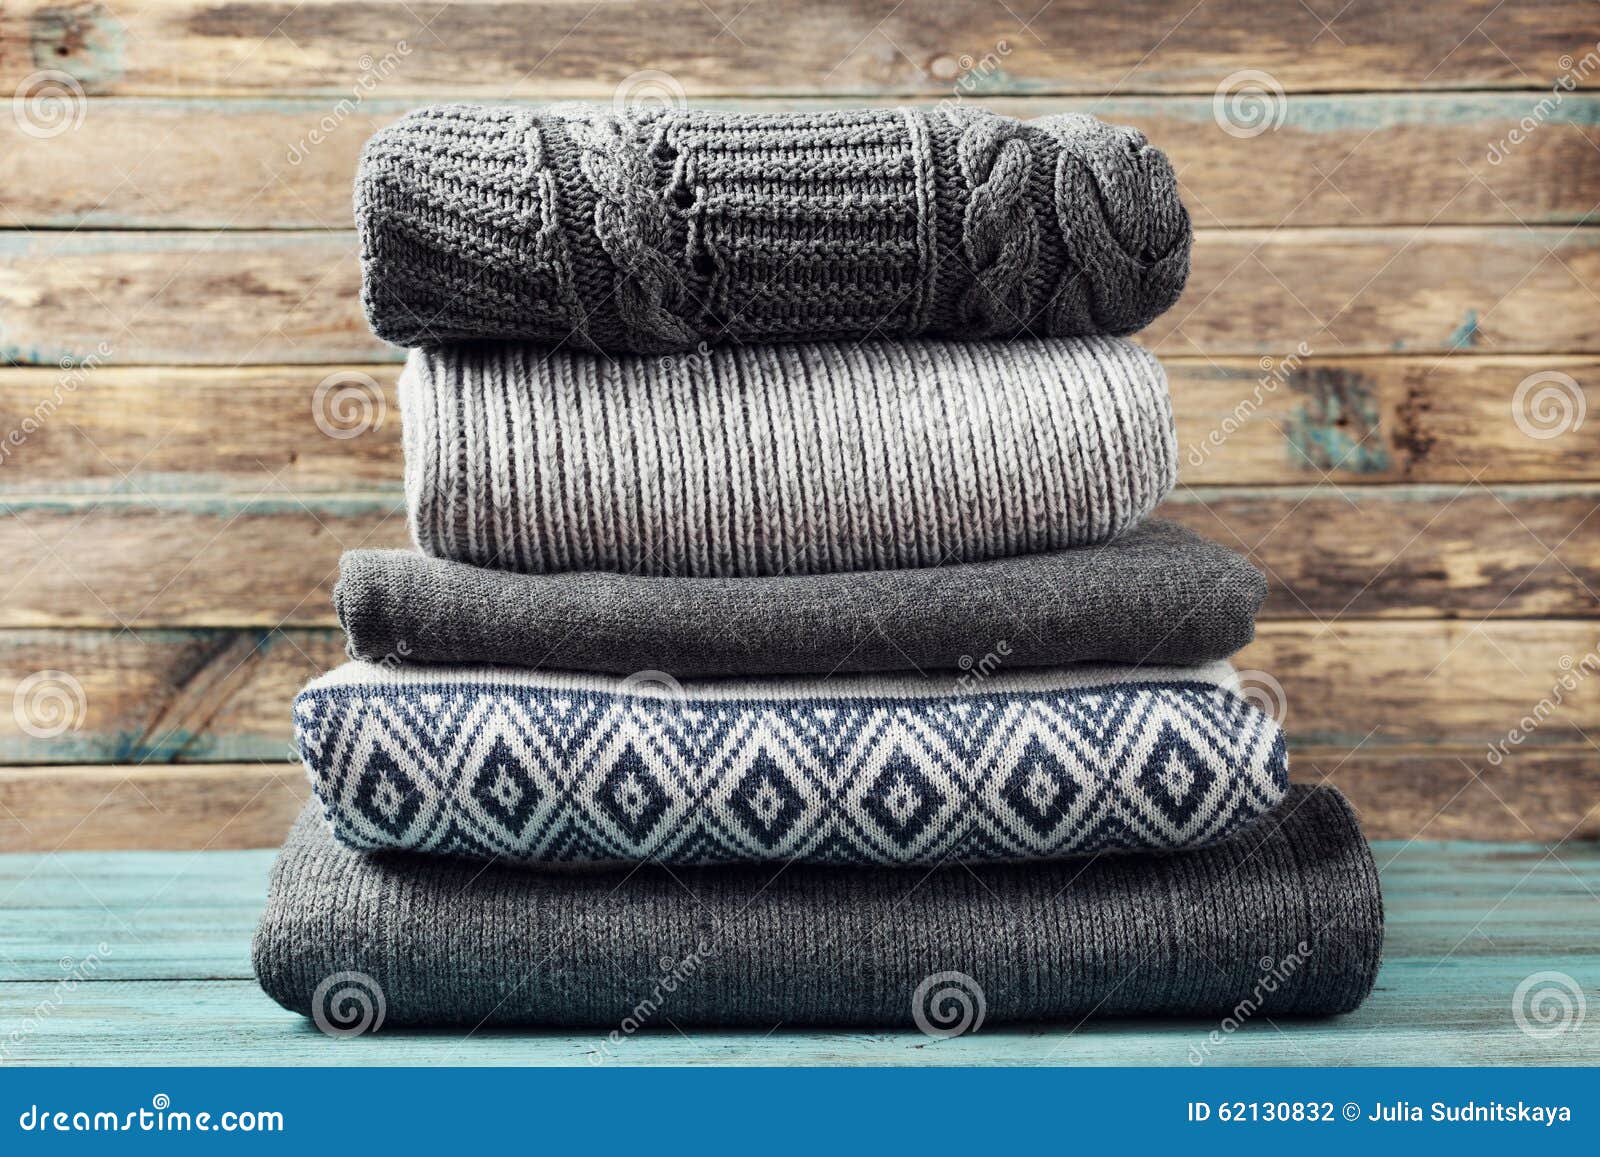 pile of knitted winter clothes on wooden background, sweaters, knitwear